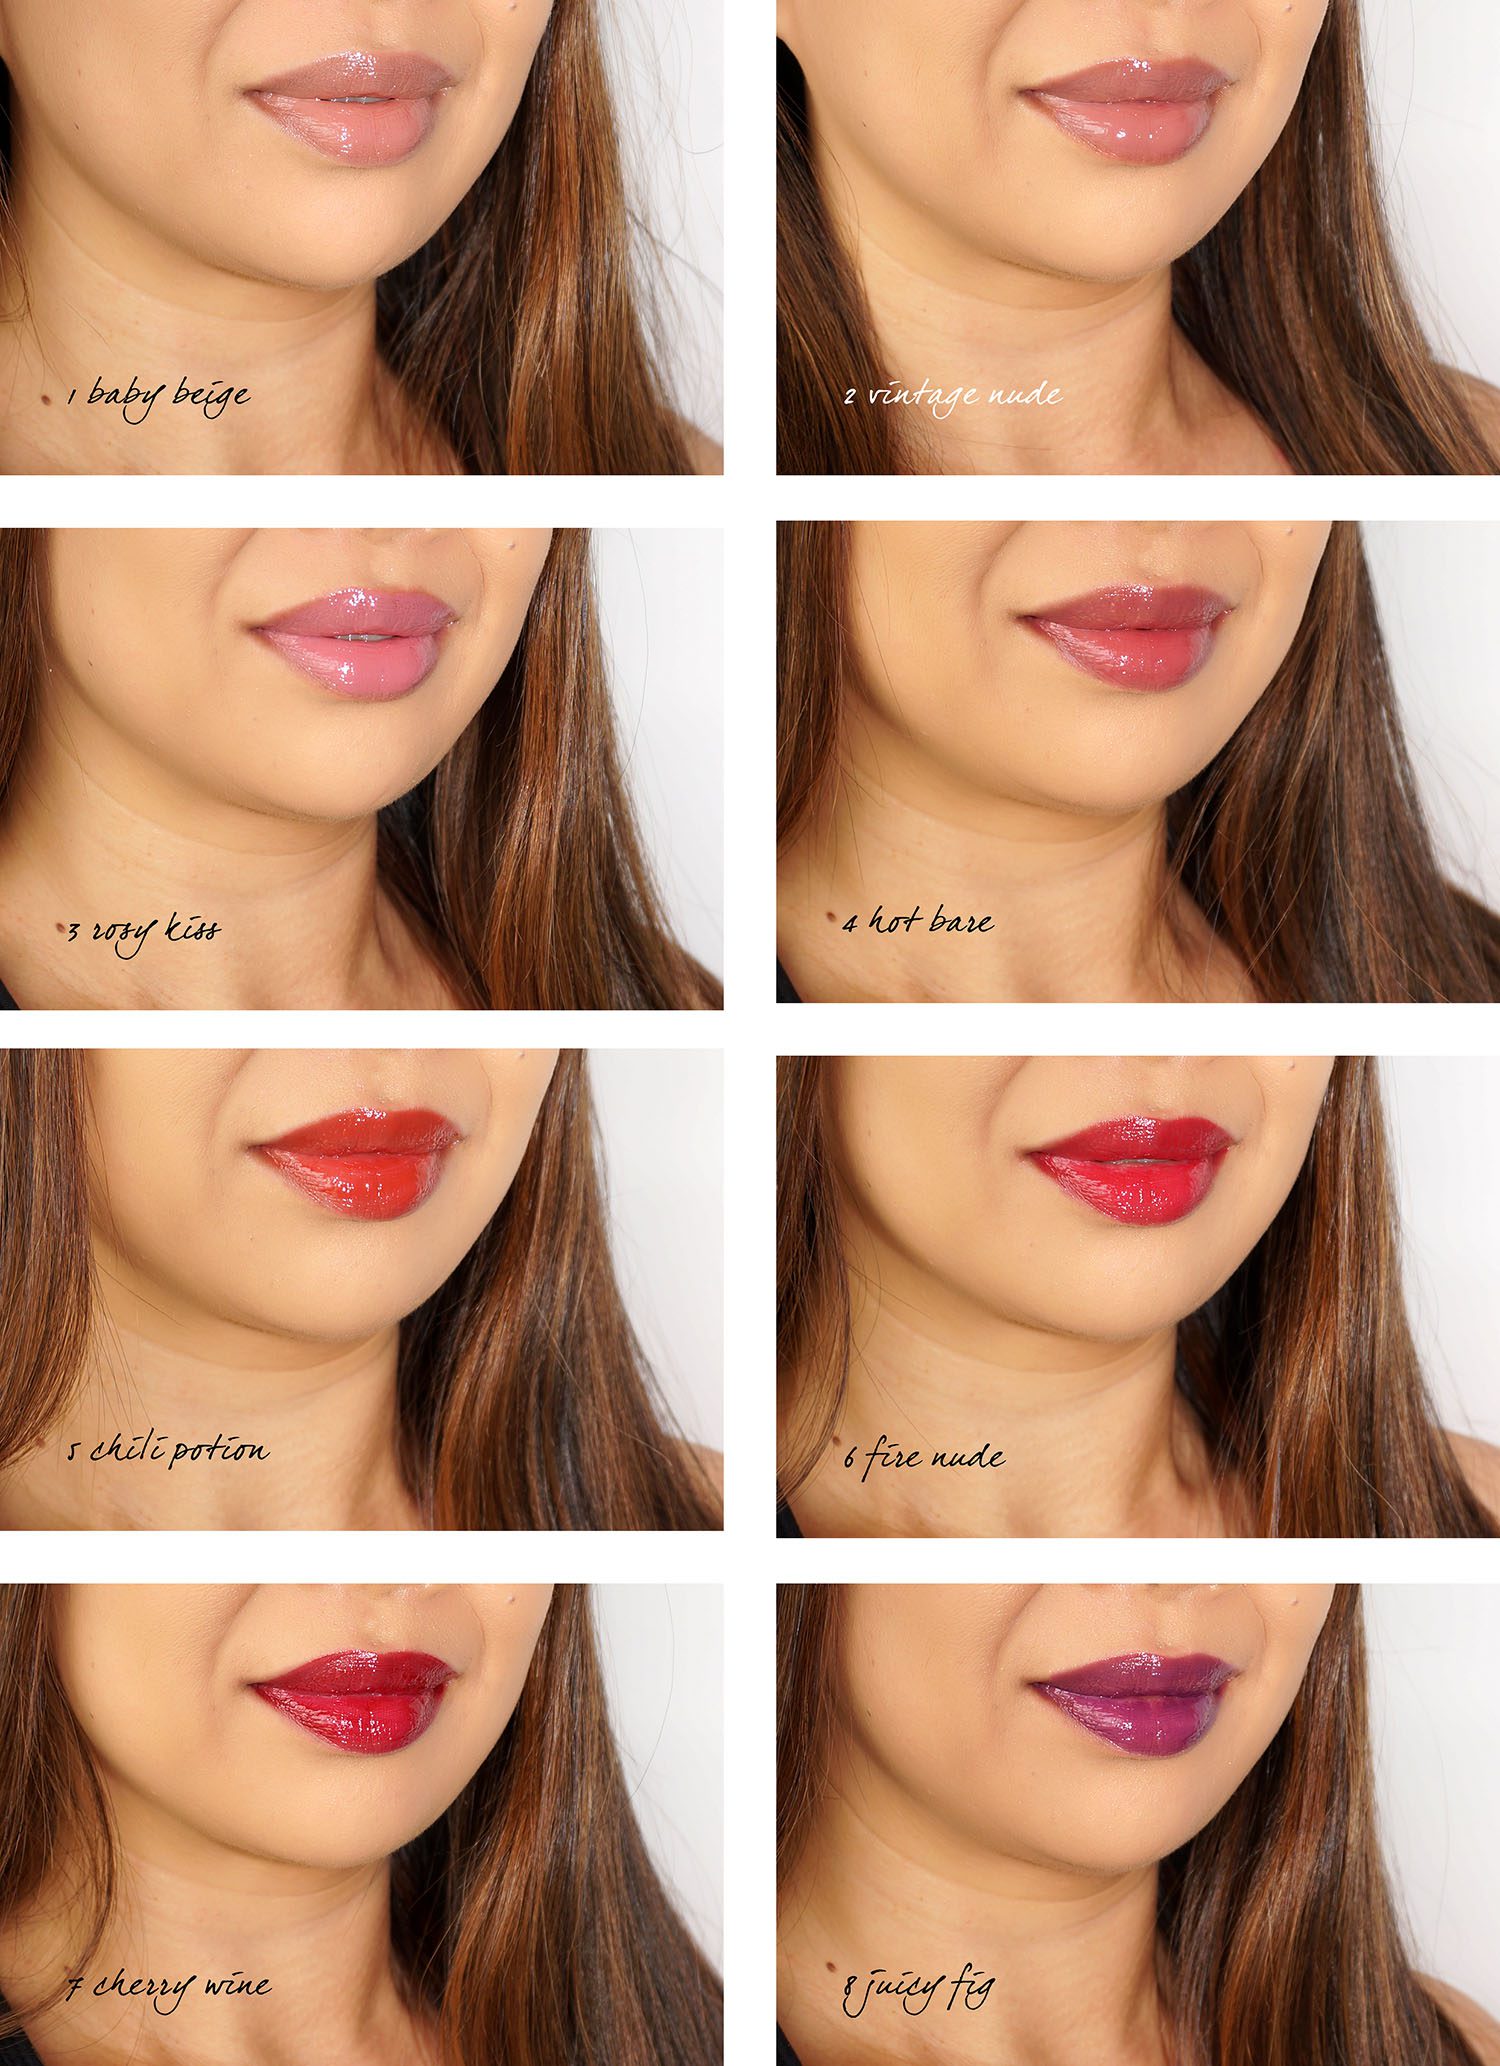 By Terry Lip Expert Shine Review Swatches The Beauty Look Book